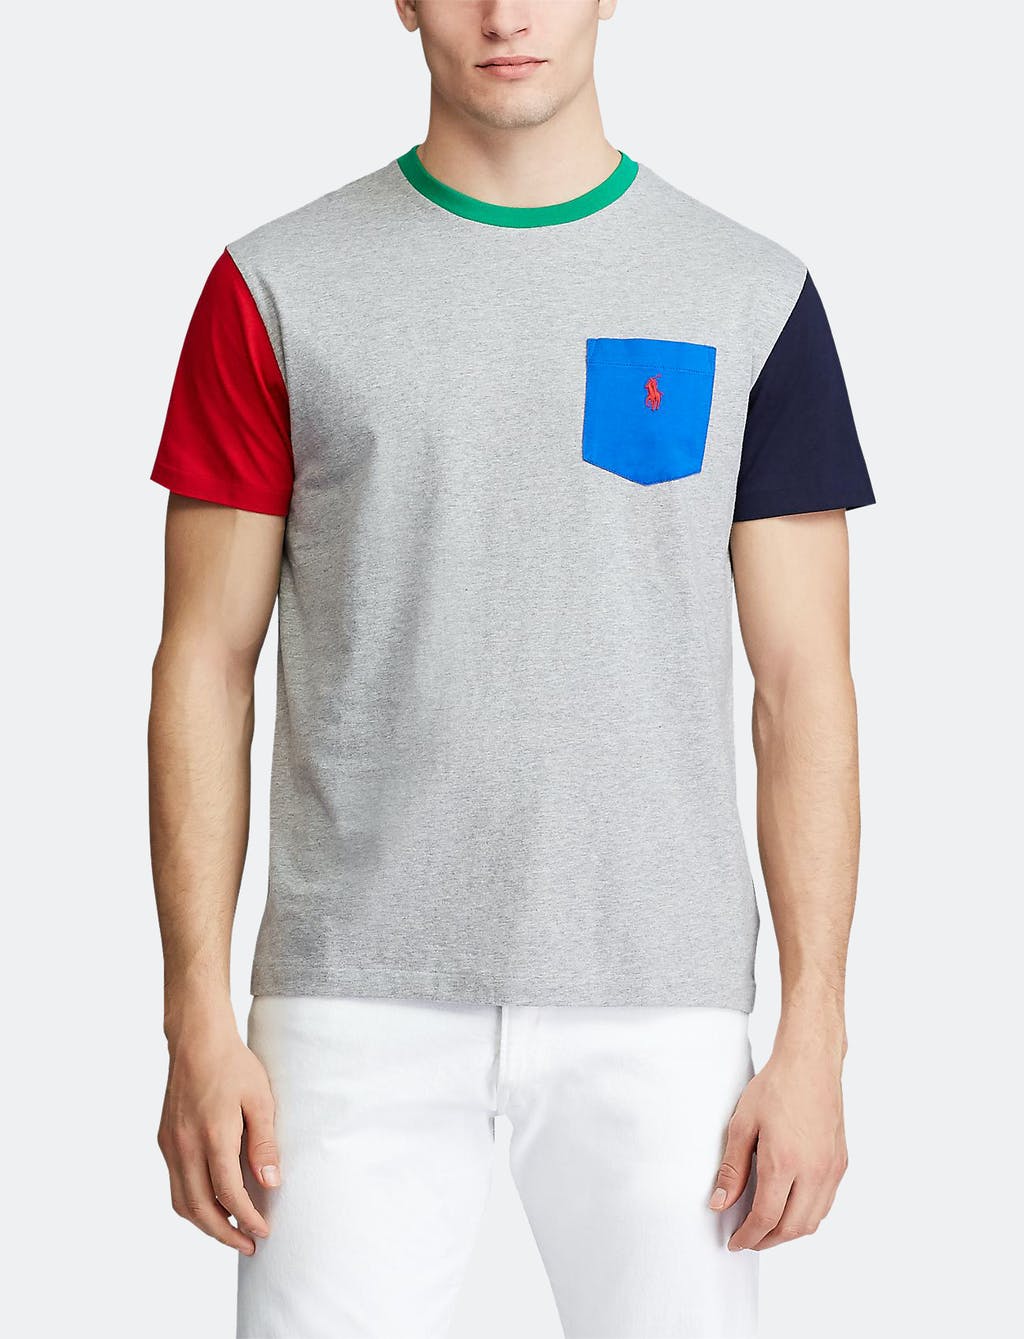 Classic Fit Jersey T-Shirt